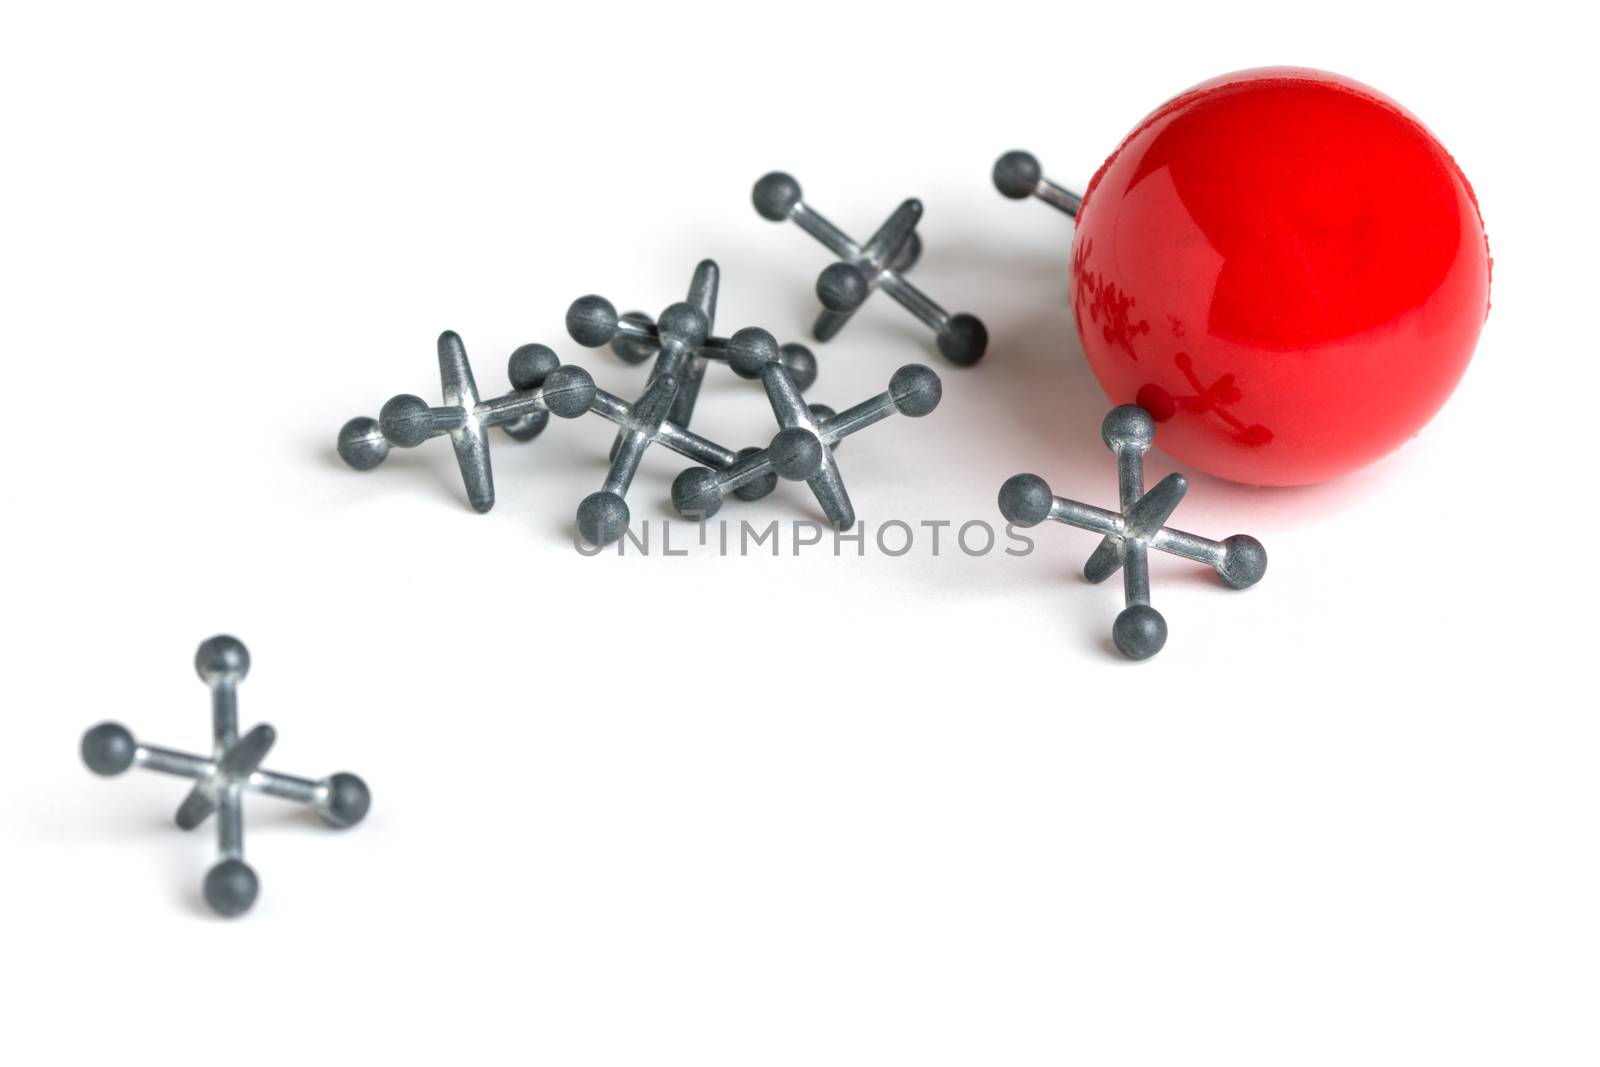 Jacks with Red Ball on White Background by justtscott